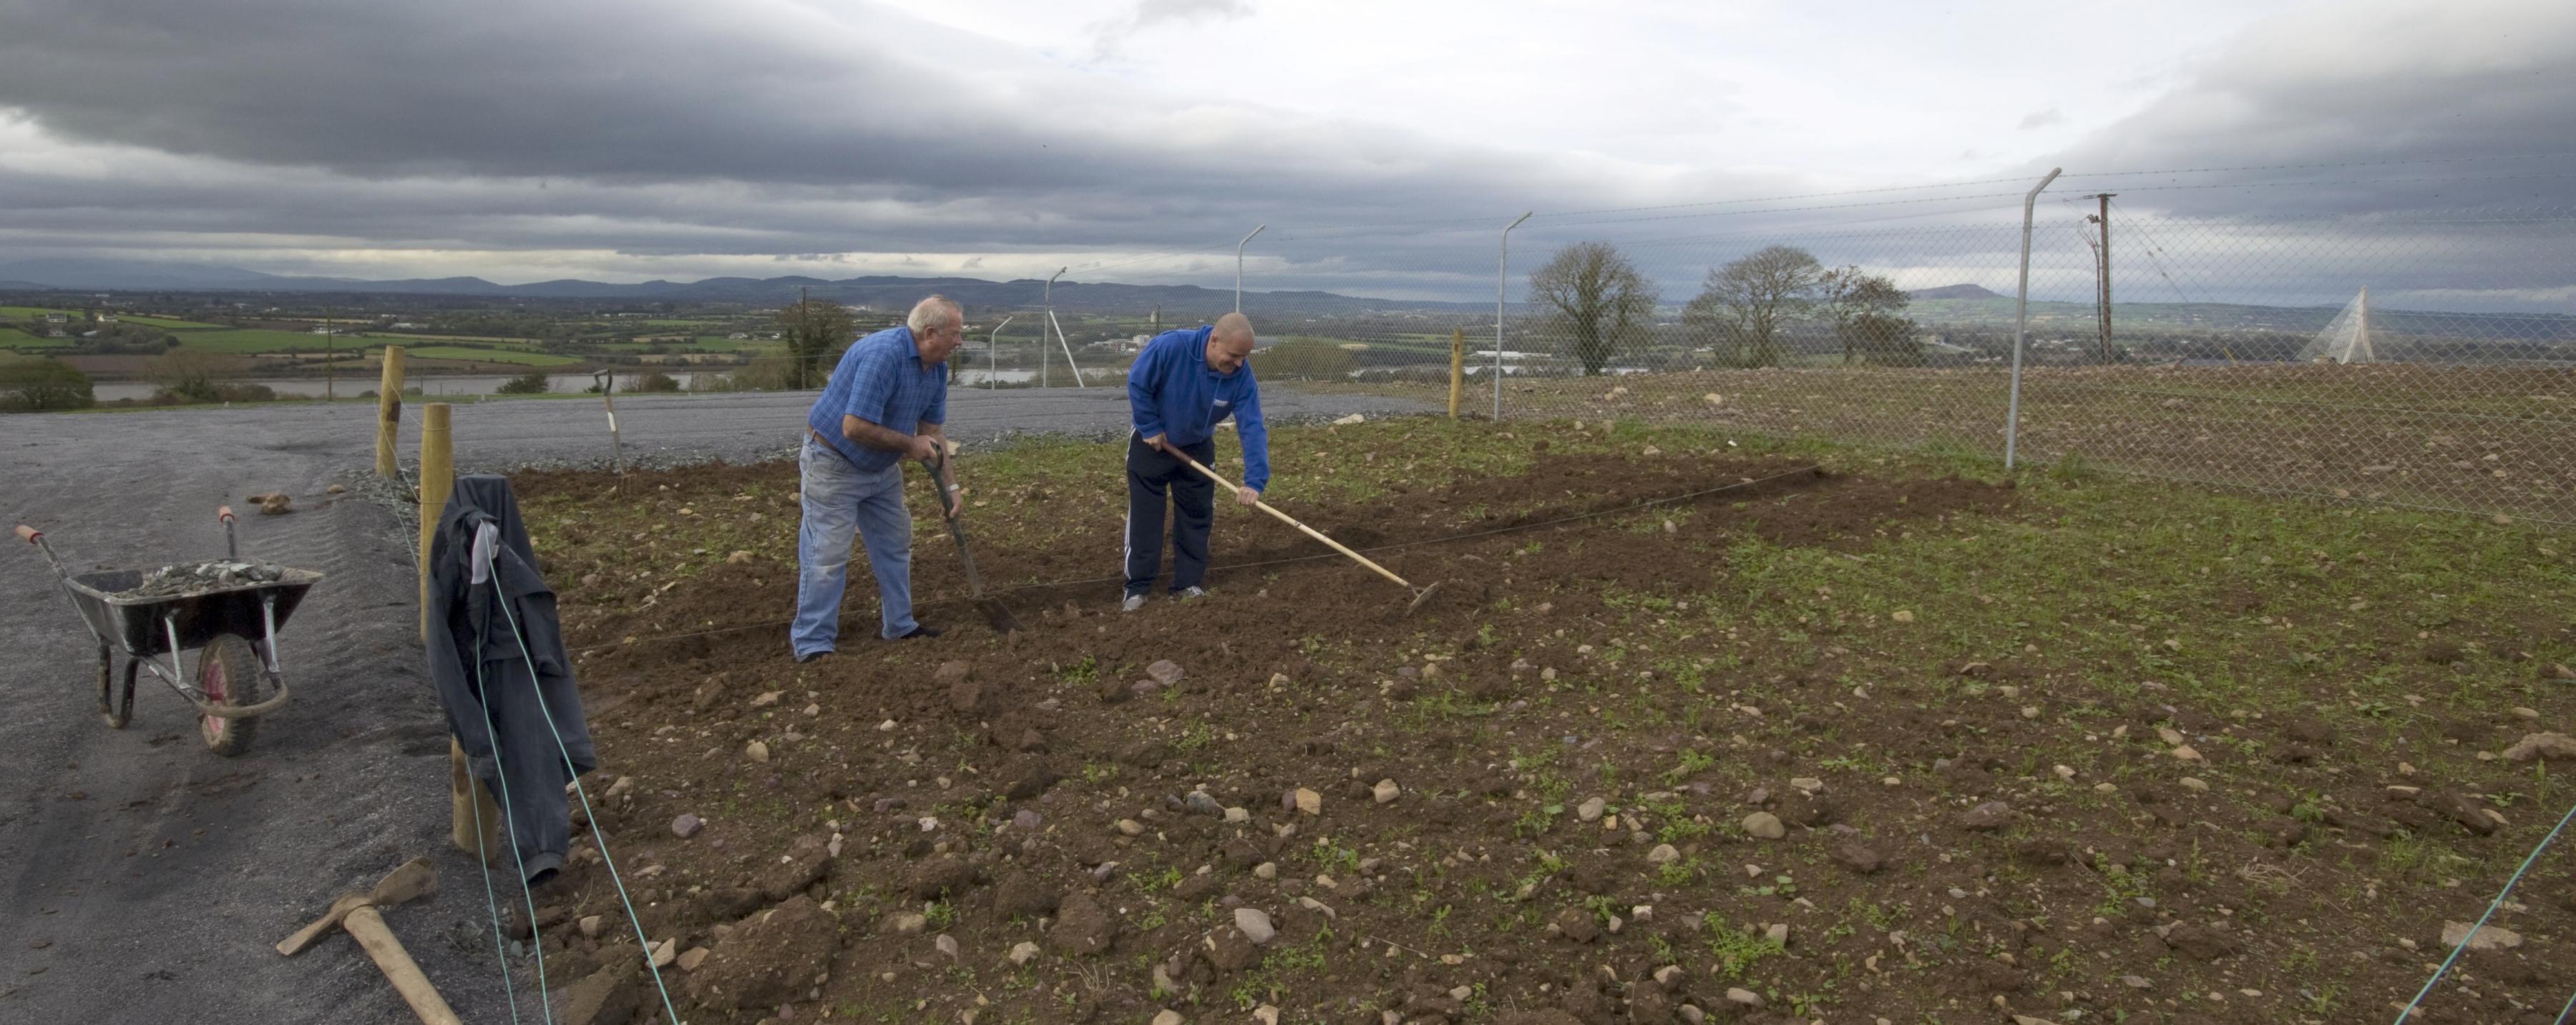 Photo of people working in Allotment in Roanmore